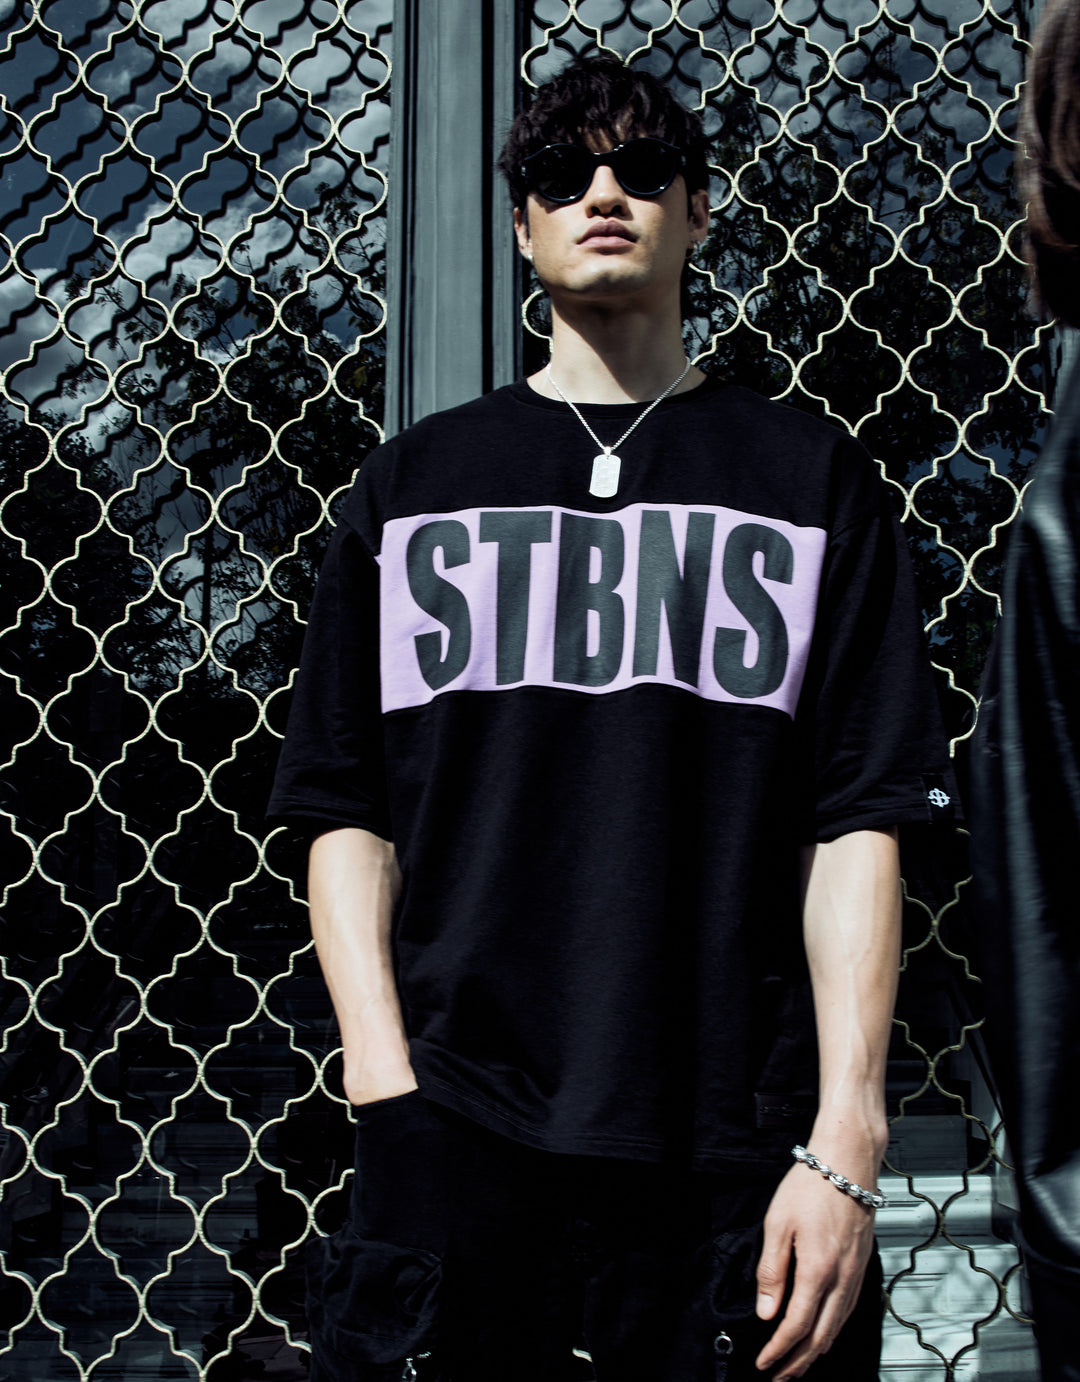 STBNS T-shirt in Black & Lavender